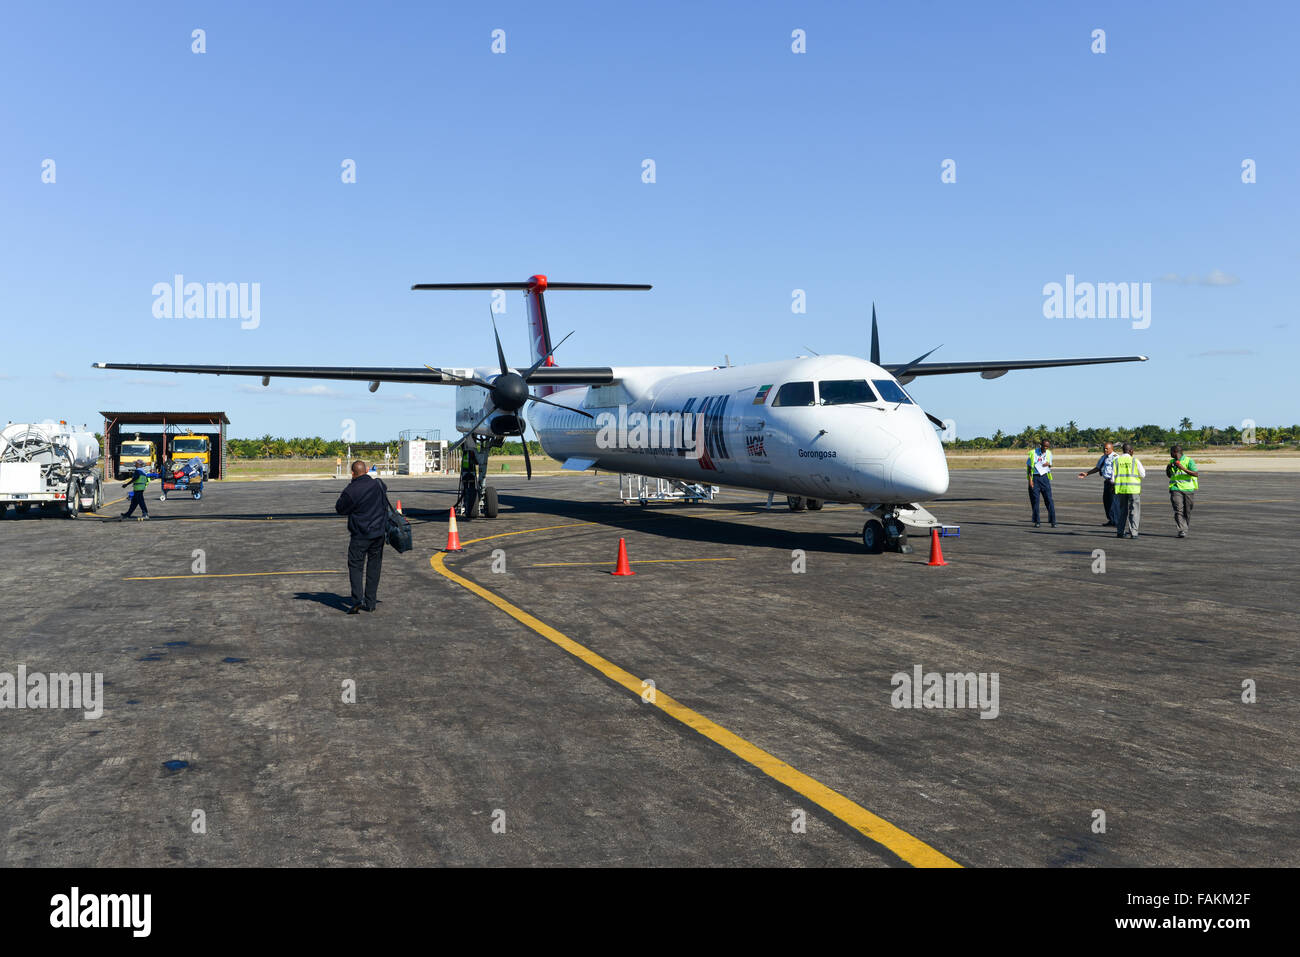 Vilankulo, Mozambique - July 4, 2012: An airplane of LAM, the Mozambique airline, at Vilankulo Airport on the runway. Stock Photo